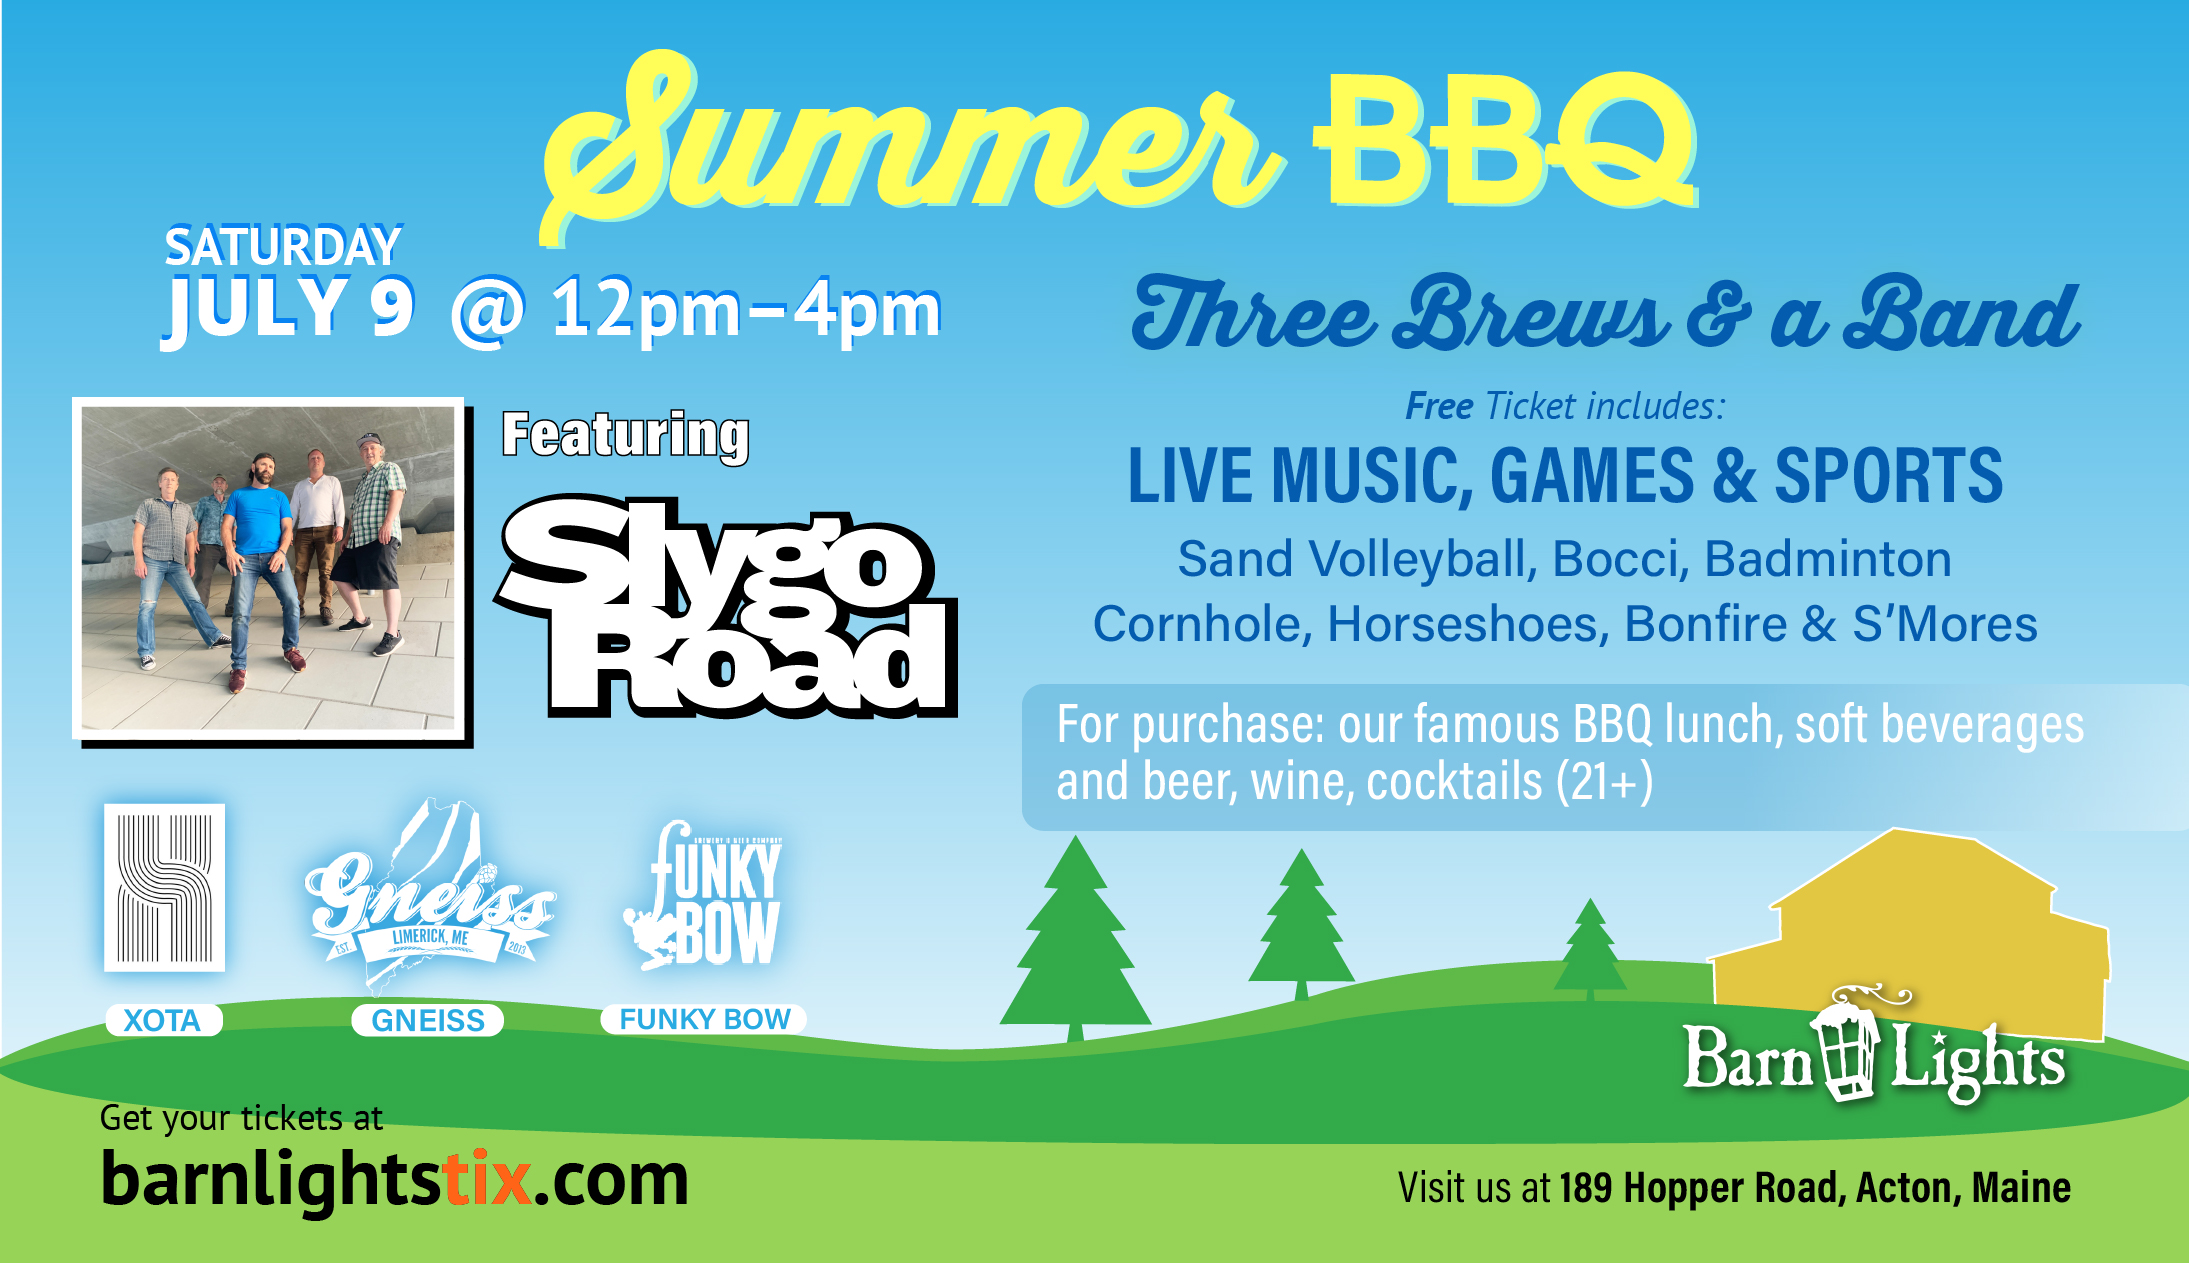 Summer BBQ featuring the blues/jazz/rock band Slygo Road. And 3 local microbreweries: Gneiss, Xota, and Funky Bow.